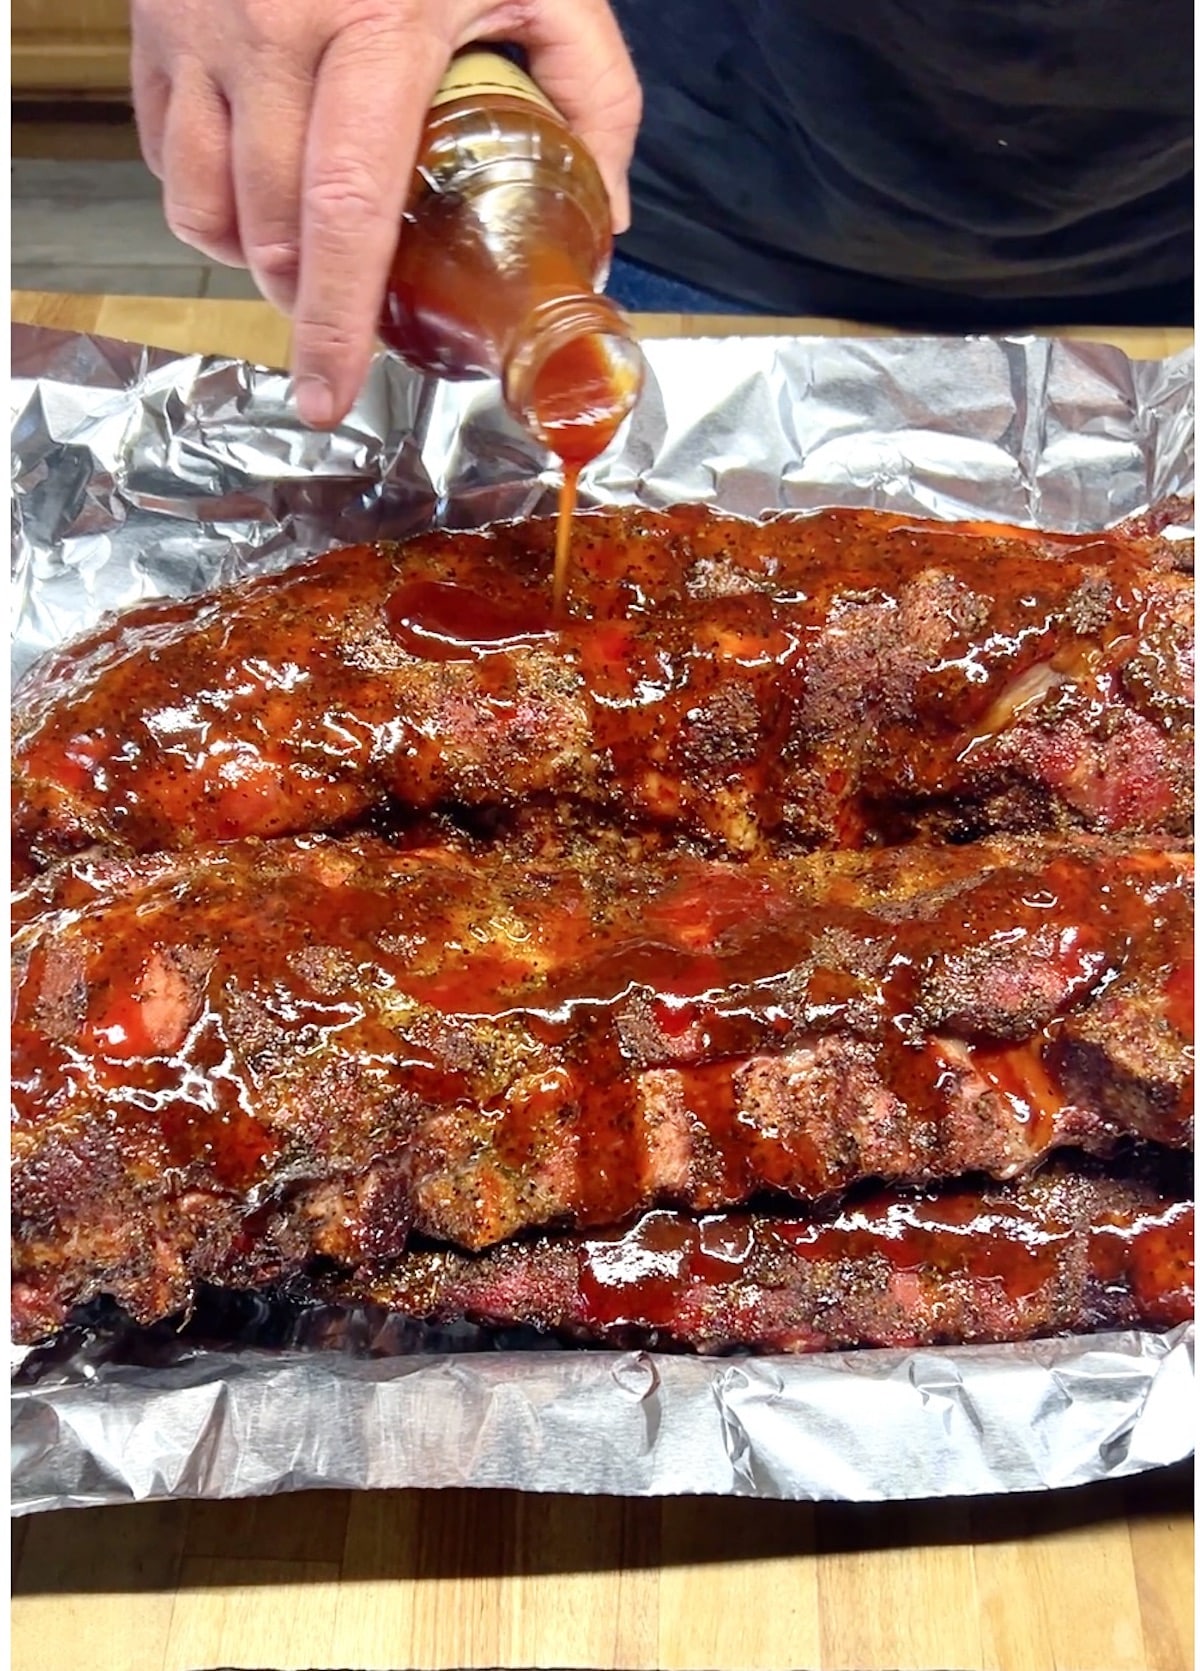 Pouring BBQ Sauce on ribs.